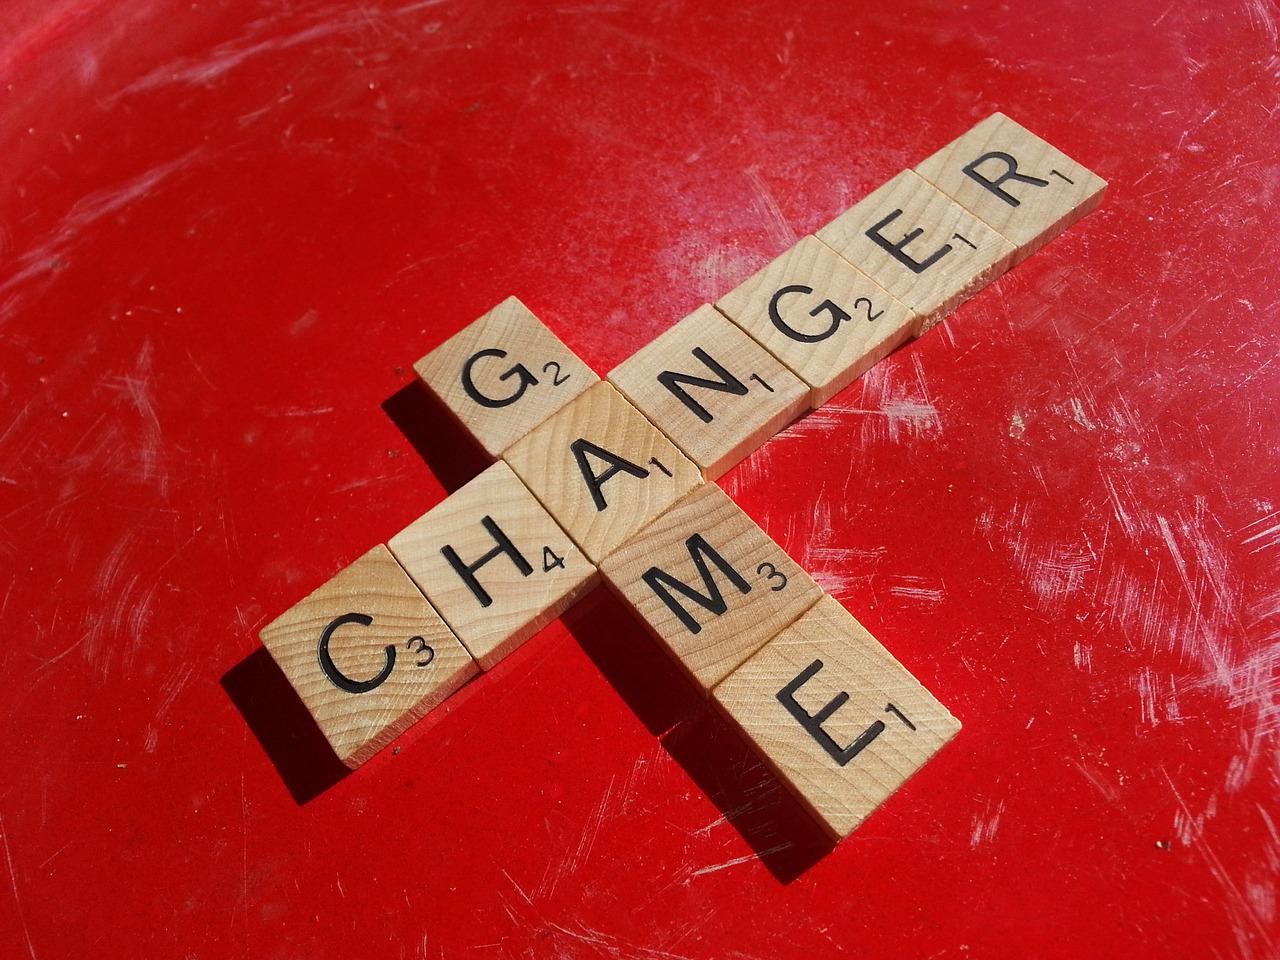 Games to Entertain Kids on a Long Car Journey - Scrabble letters spelling out game changer